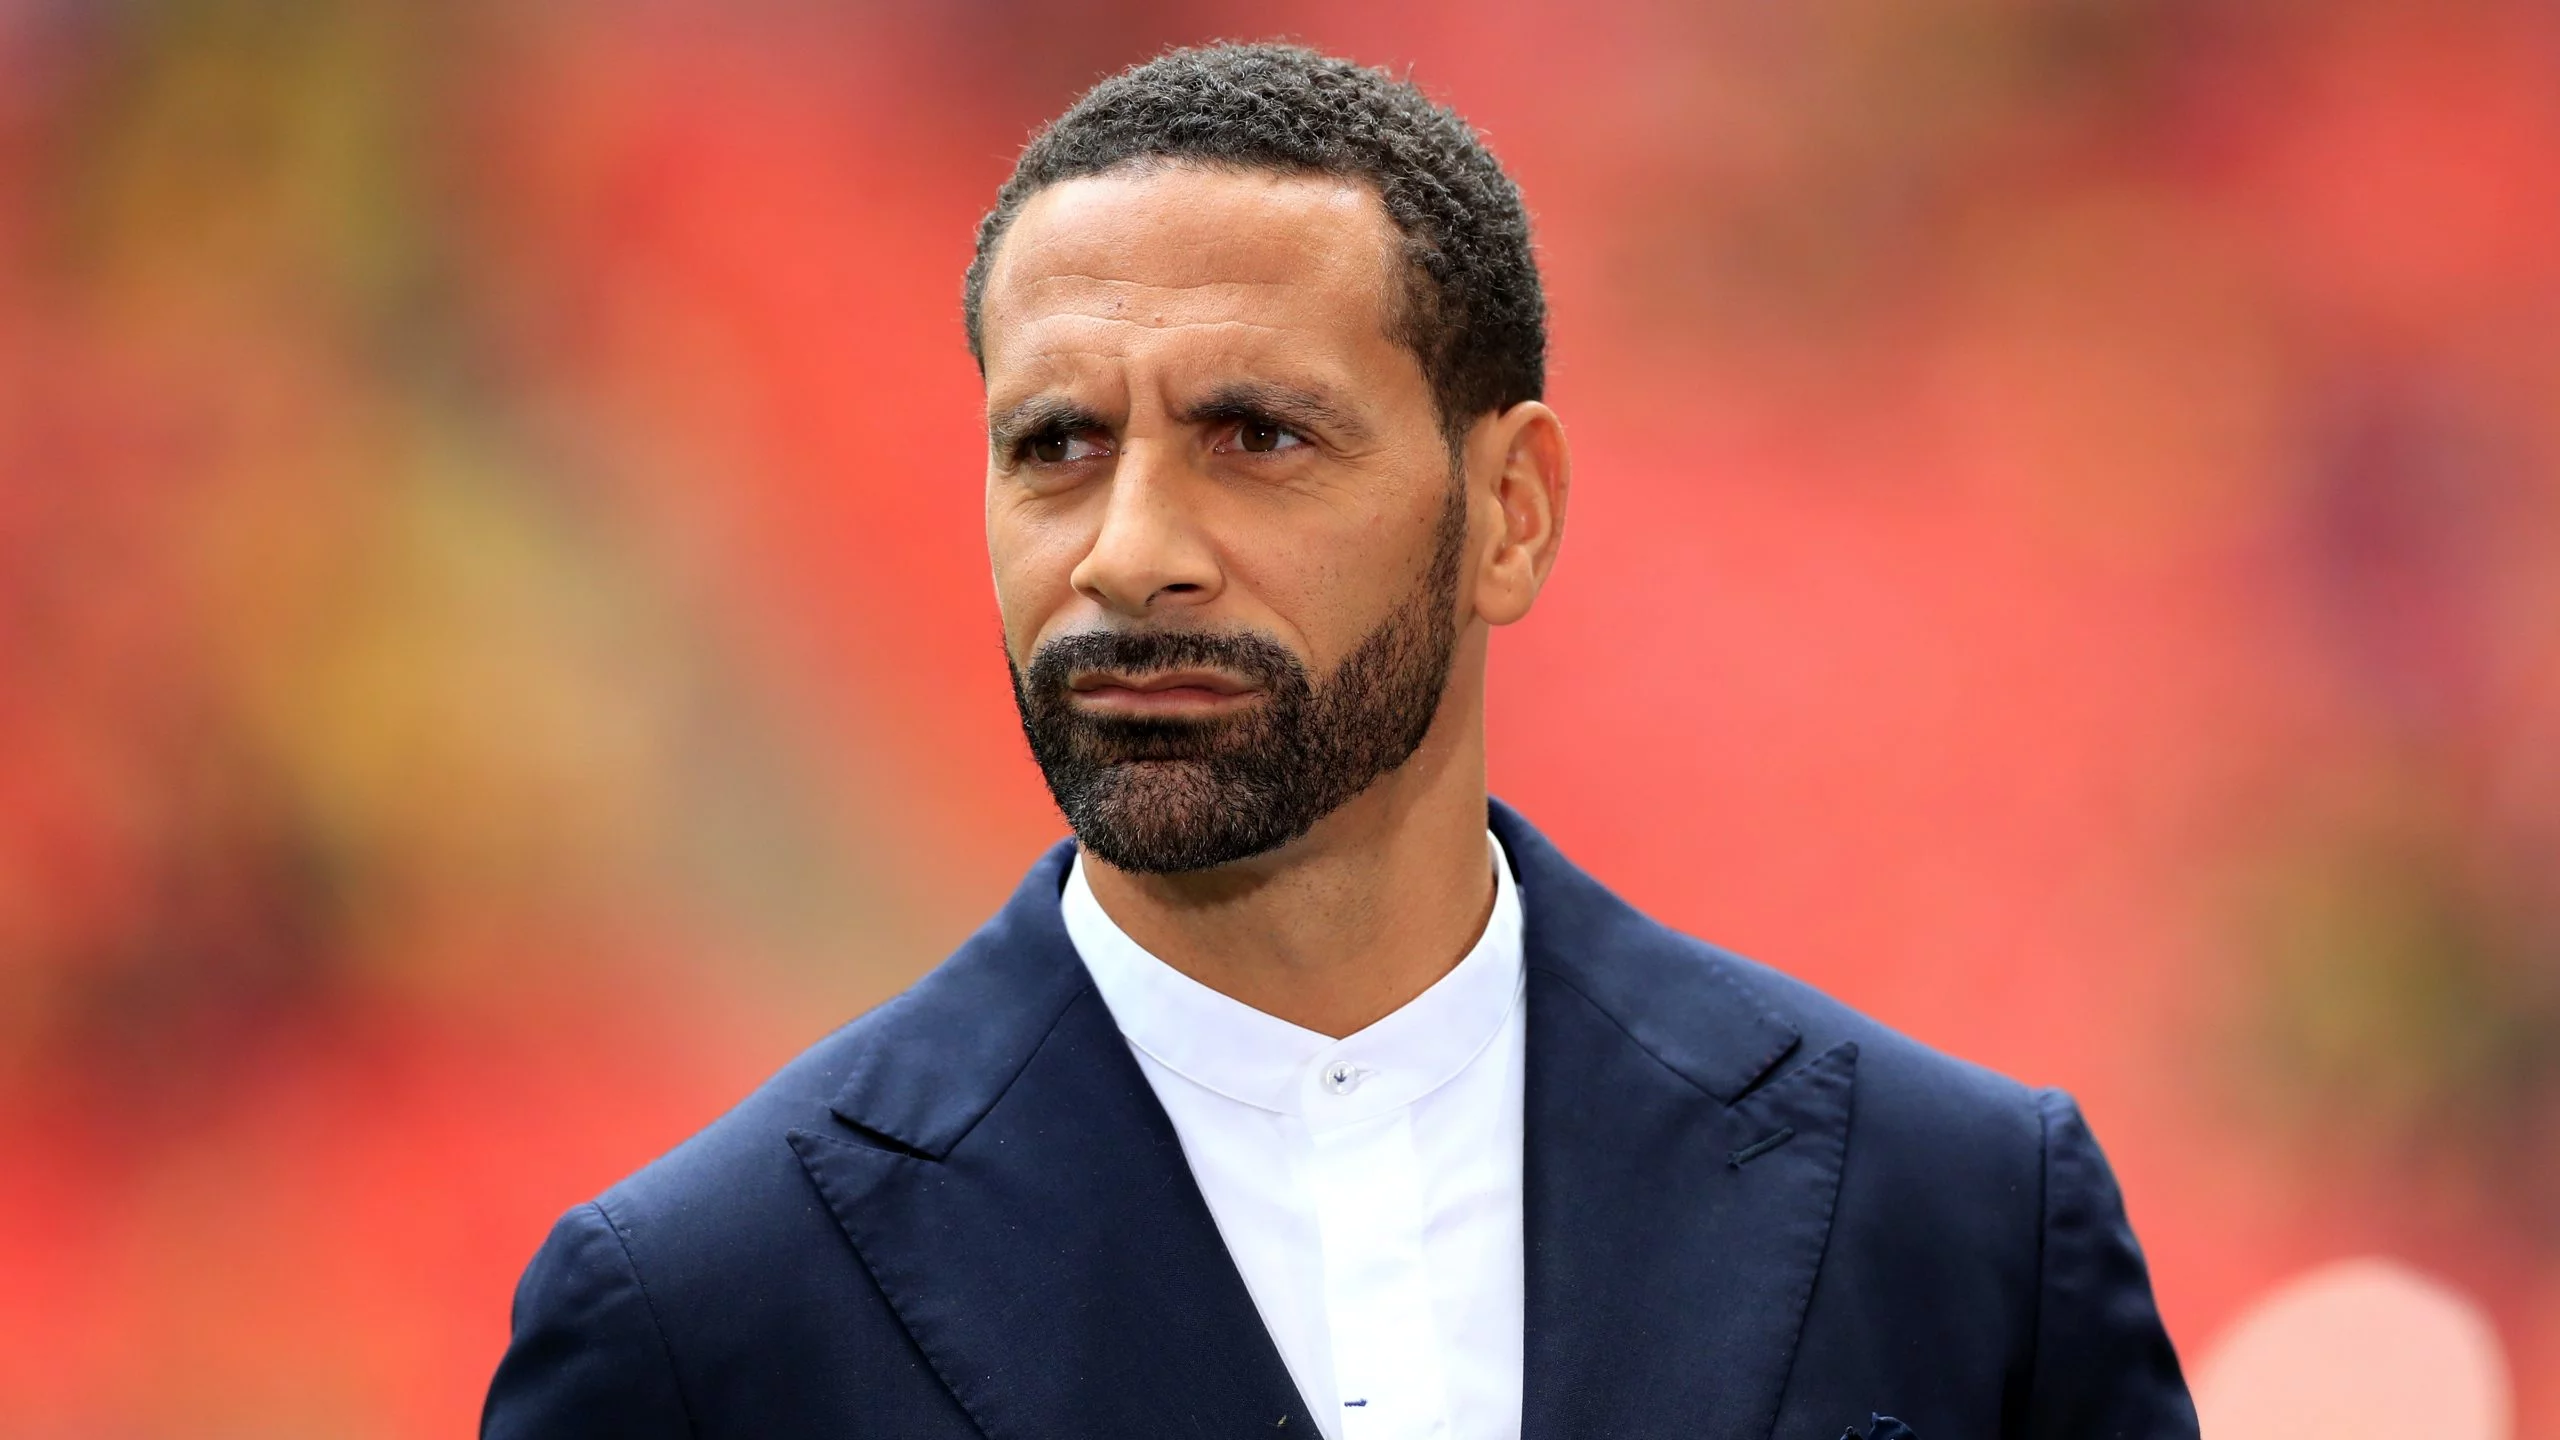 Rio Ferdinand says he’d pick £40m Tottenham player over Manchester United star right now